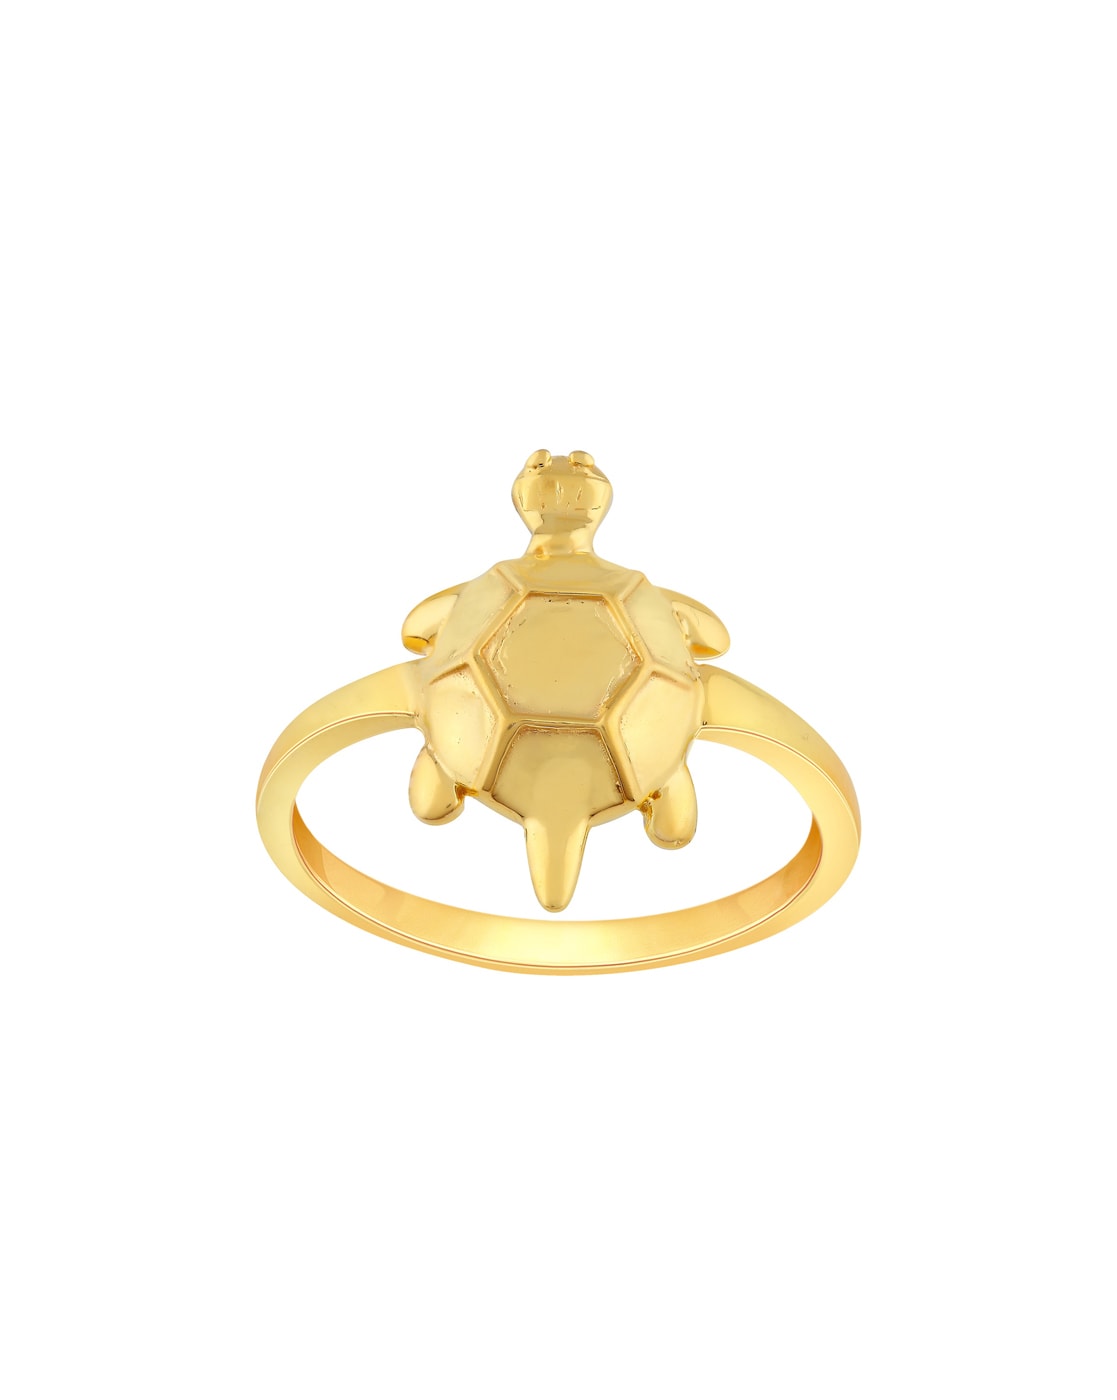 Buy Vighnaharta Attraction Turtle CZ Rhodium Plated Alloy Gents Ring for  Men & Boys Online at Low Prices in India - Paytmmall.com